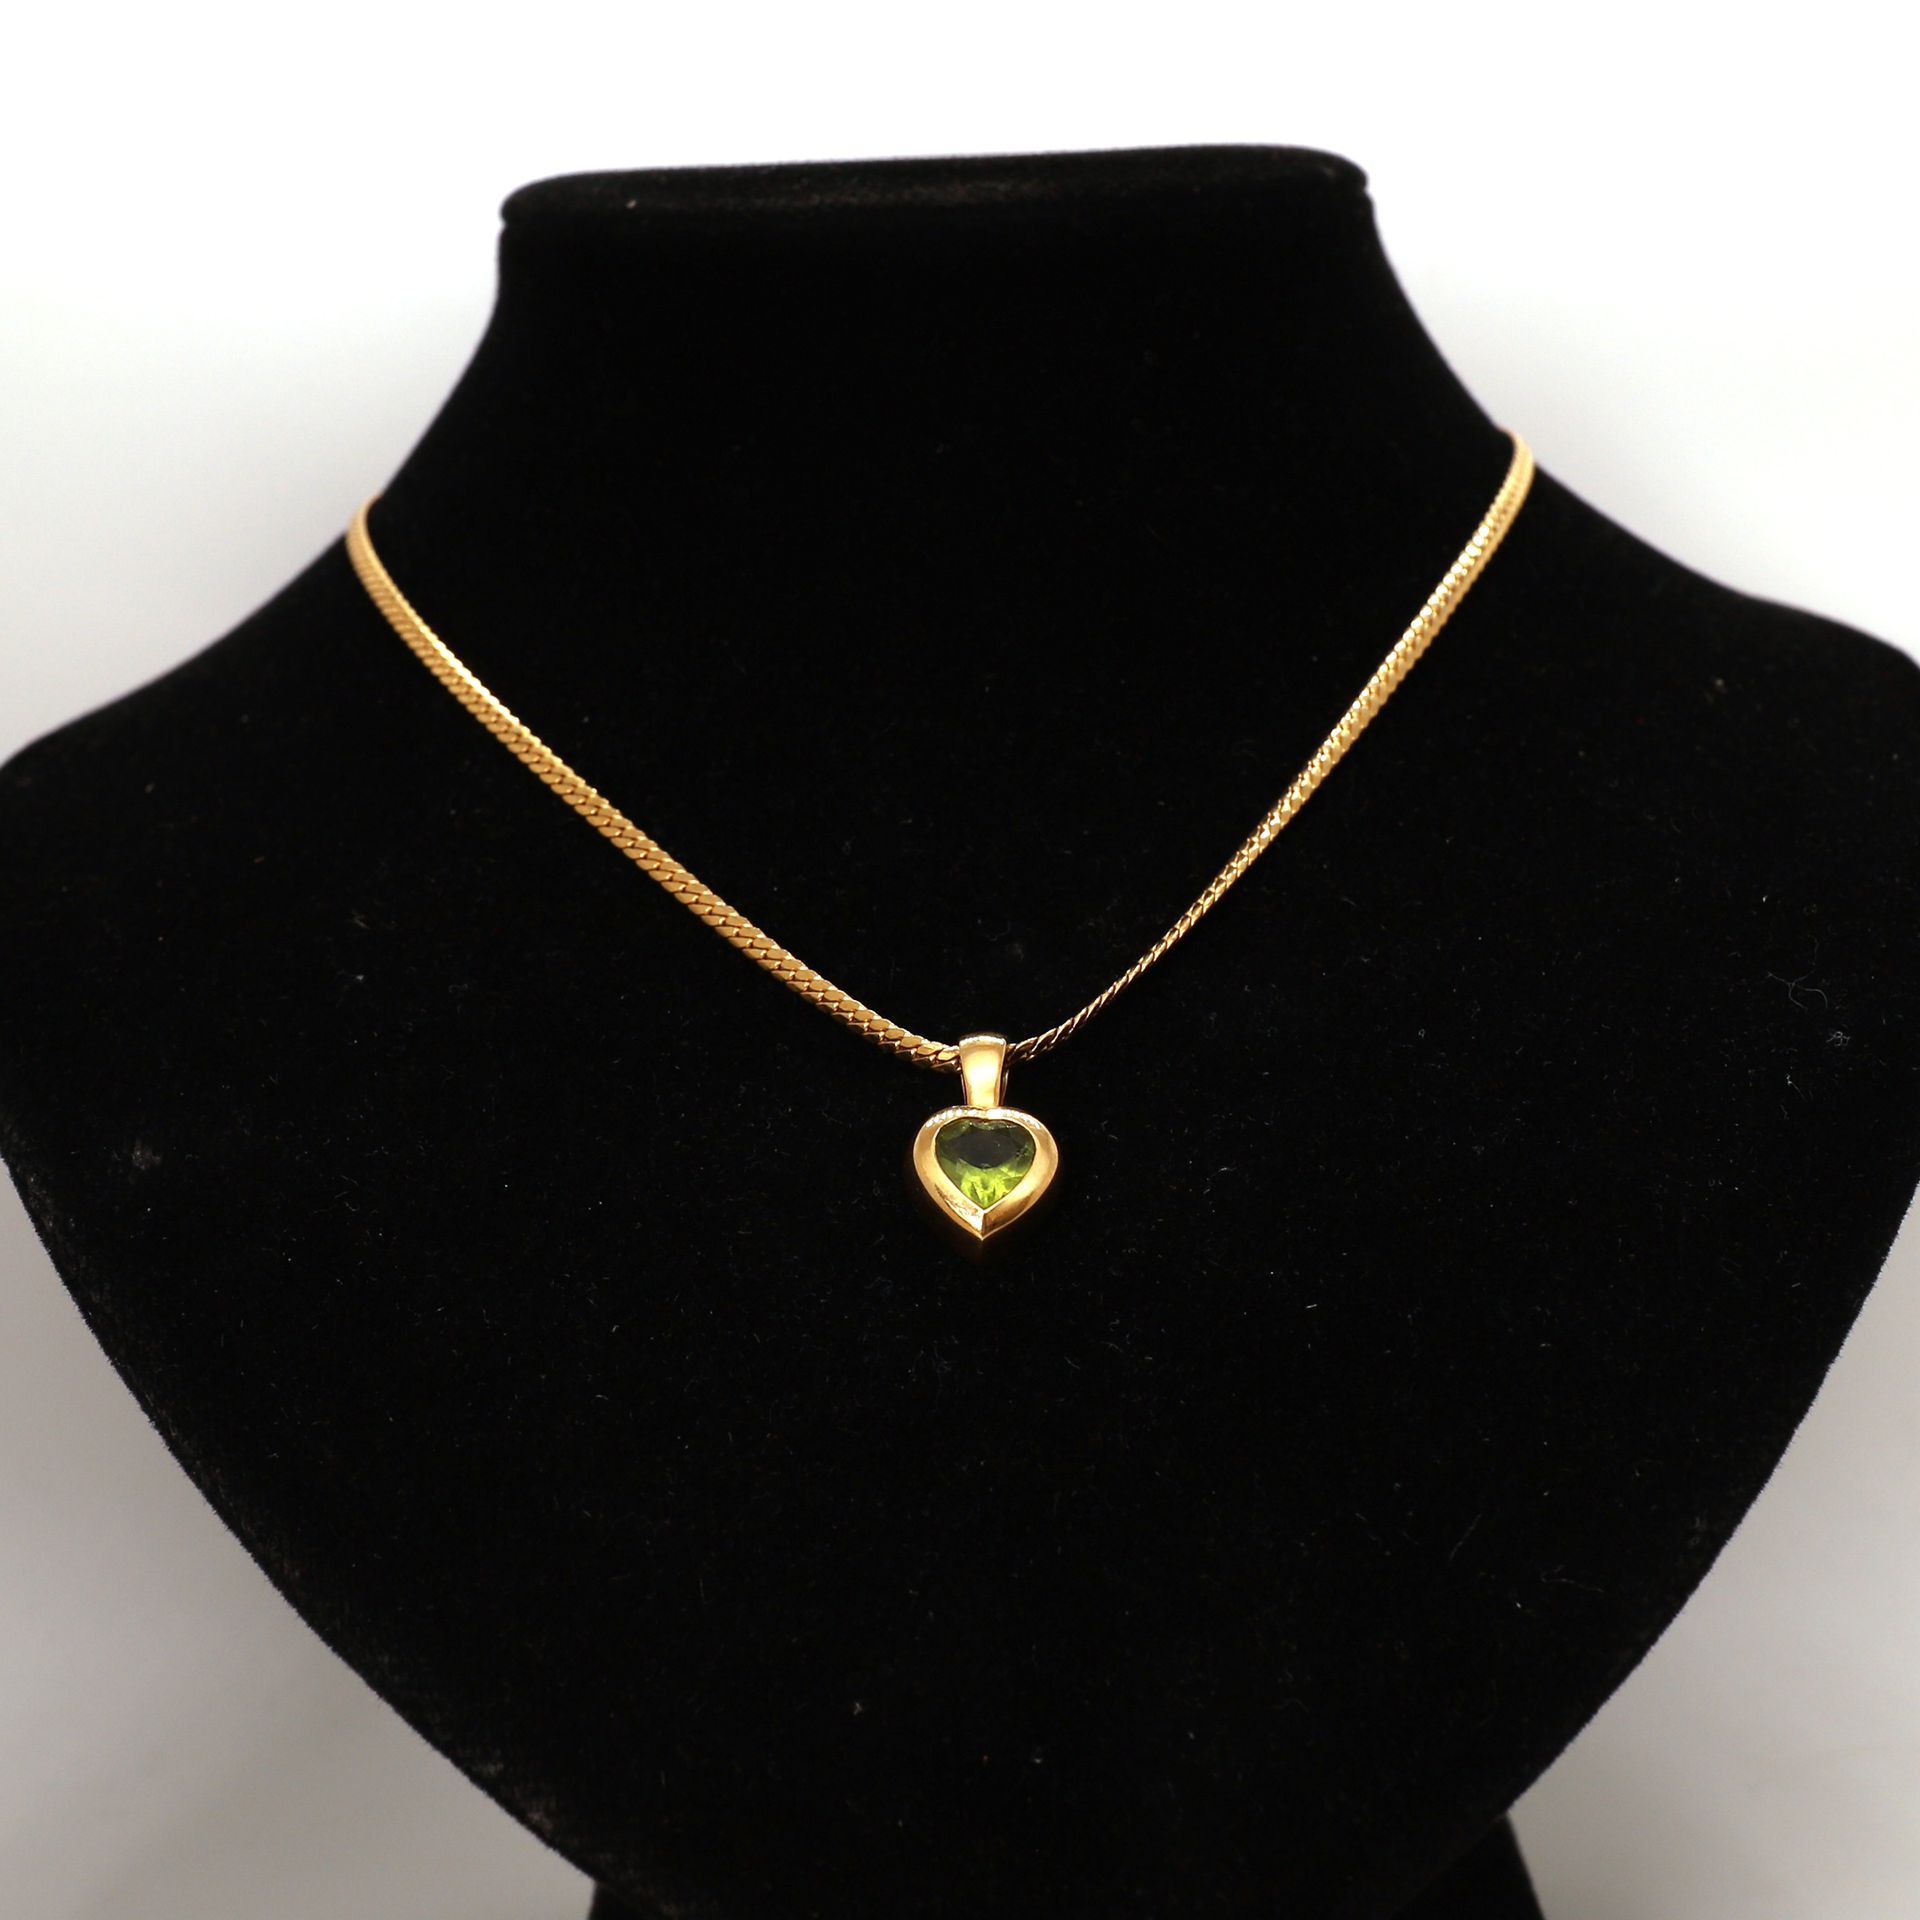 Null YELLOW GOLD CHOKER WITH A YELLOW GOLD HEART PENDANT SET WITH A GREEN STONE
&hellip;